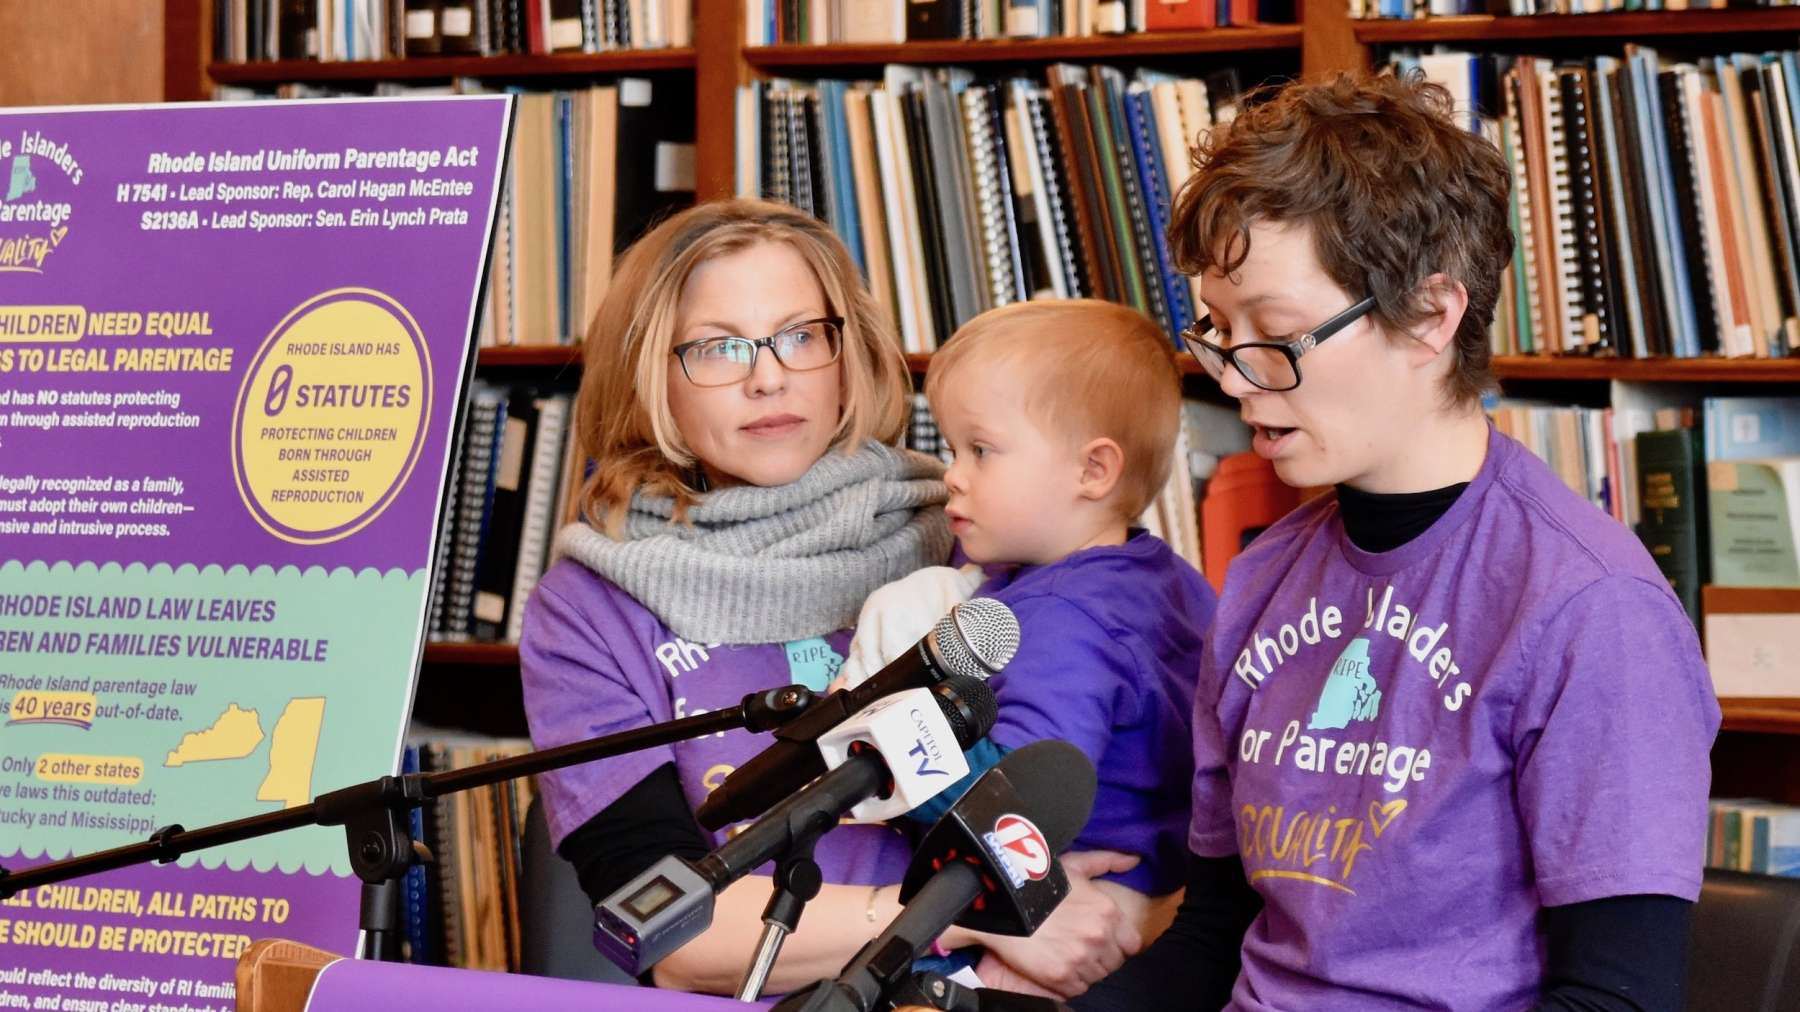 Rhode Island News: Parents and advocates call for urgently needed comprehensive parentage reform